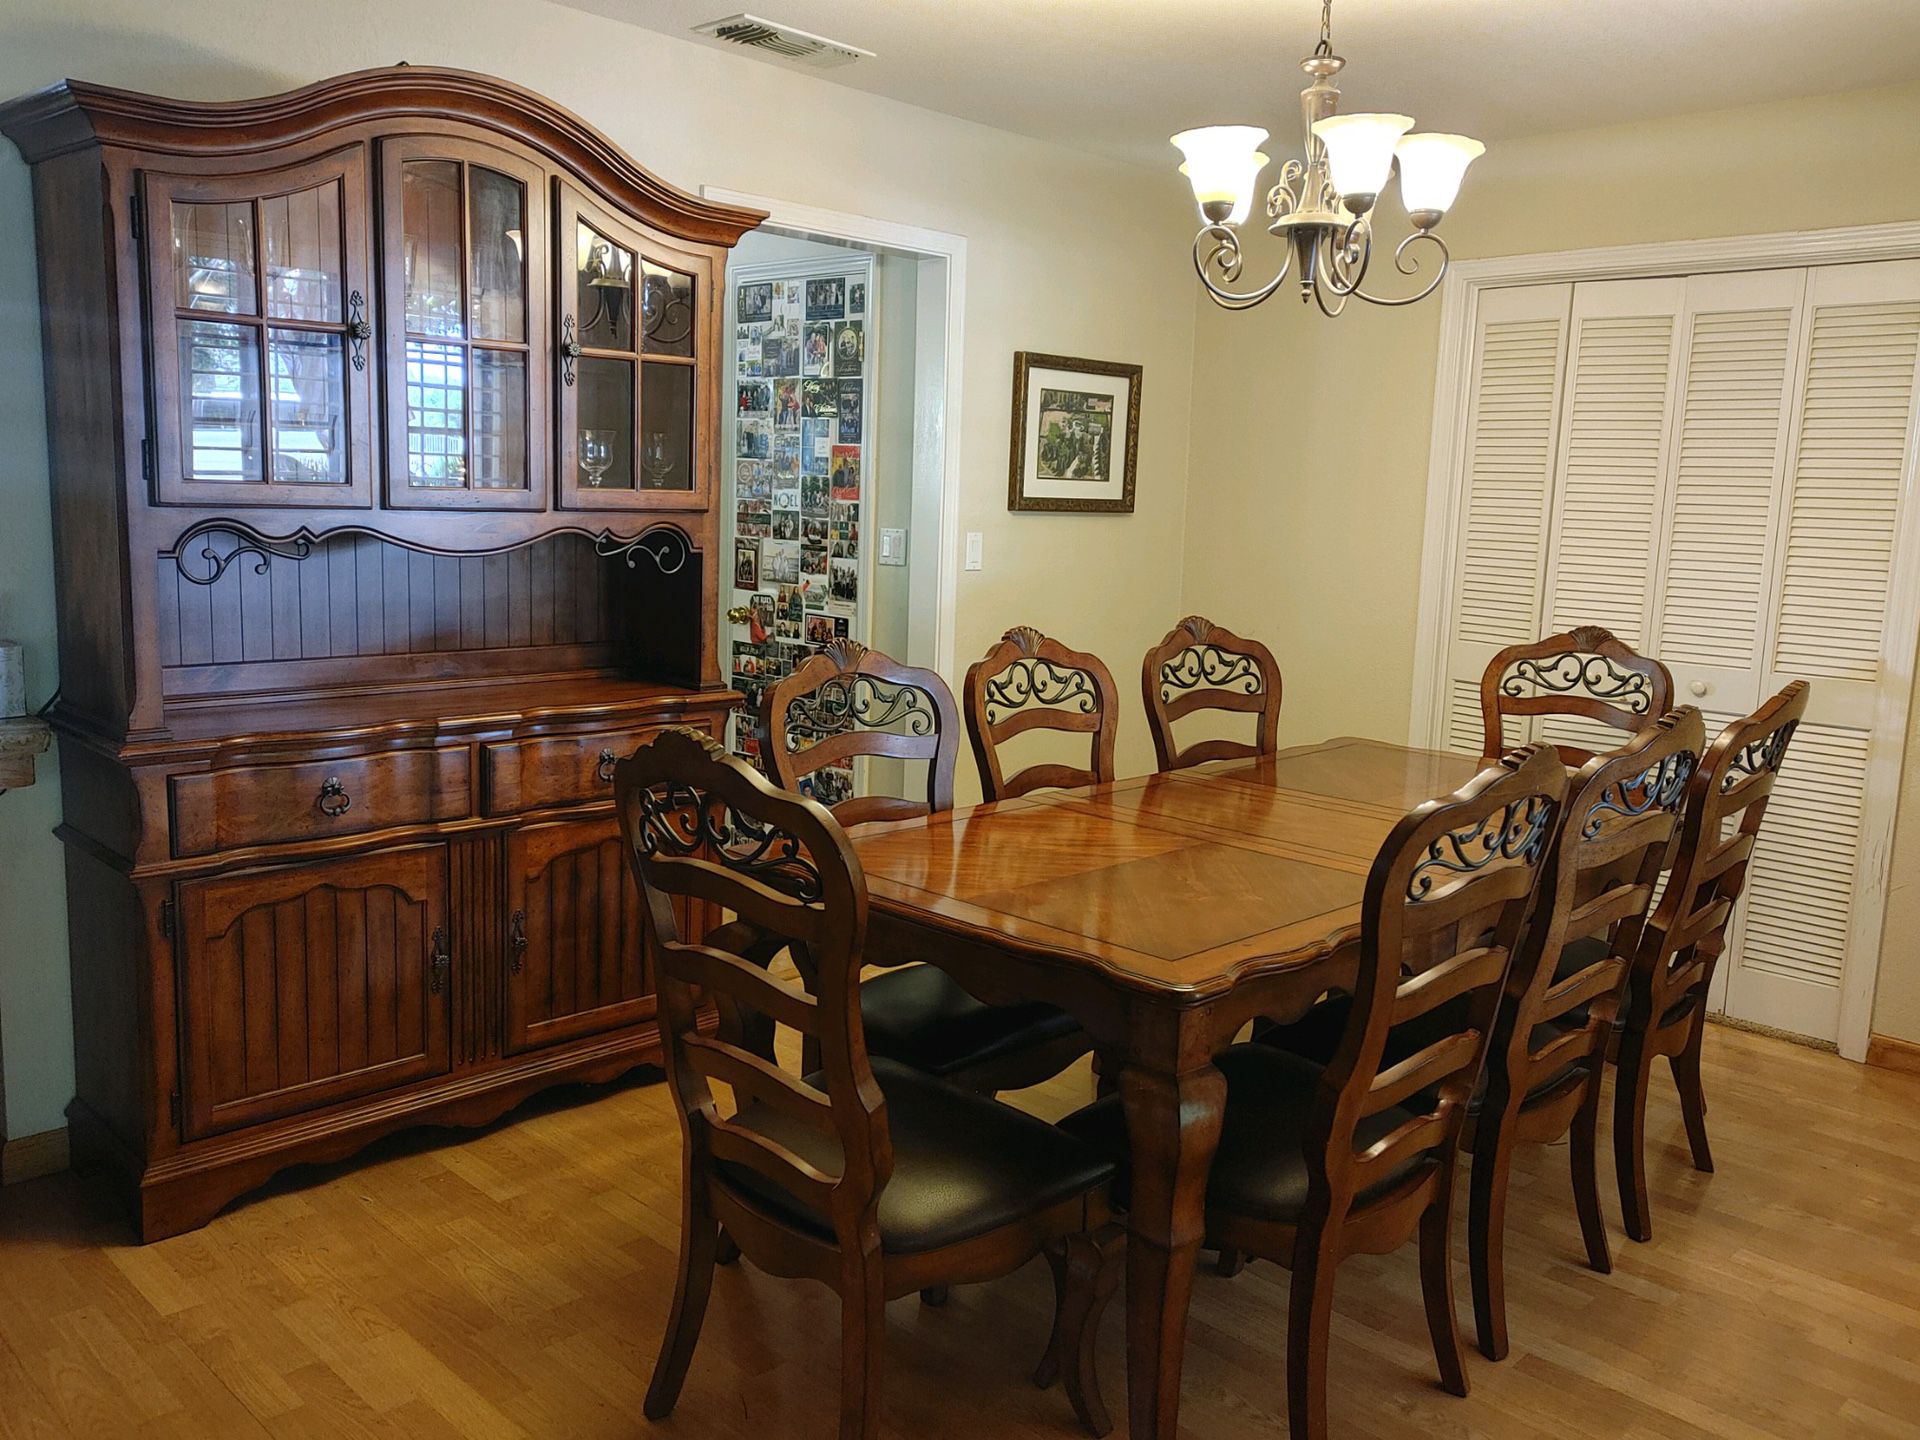 Beautiful dining set and hutch